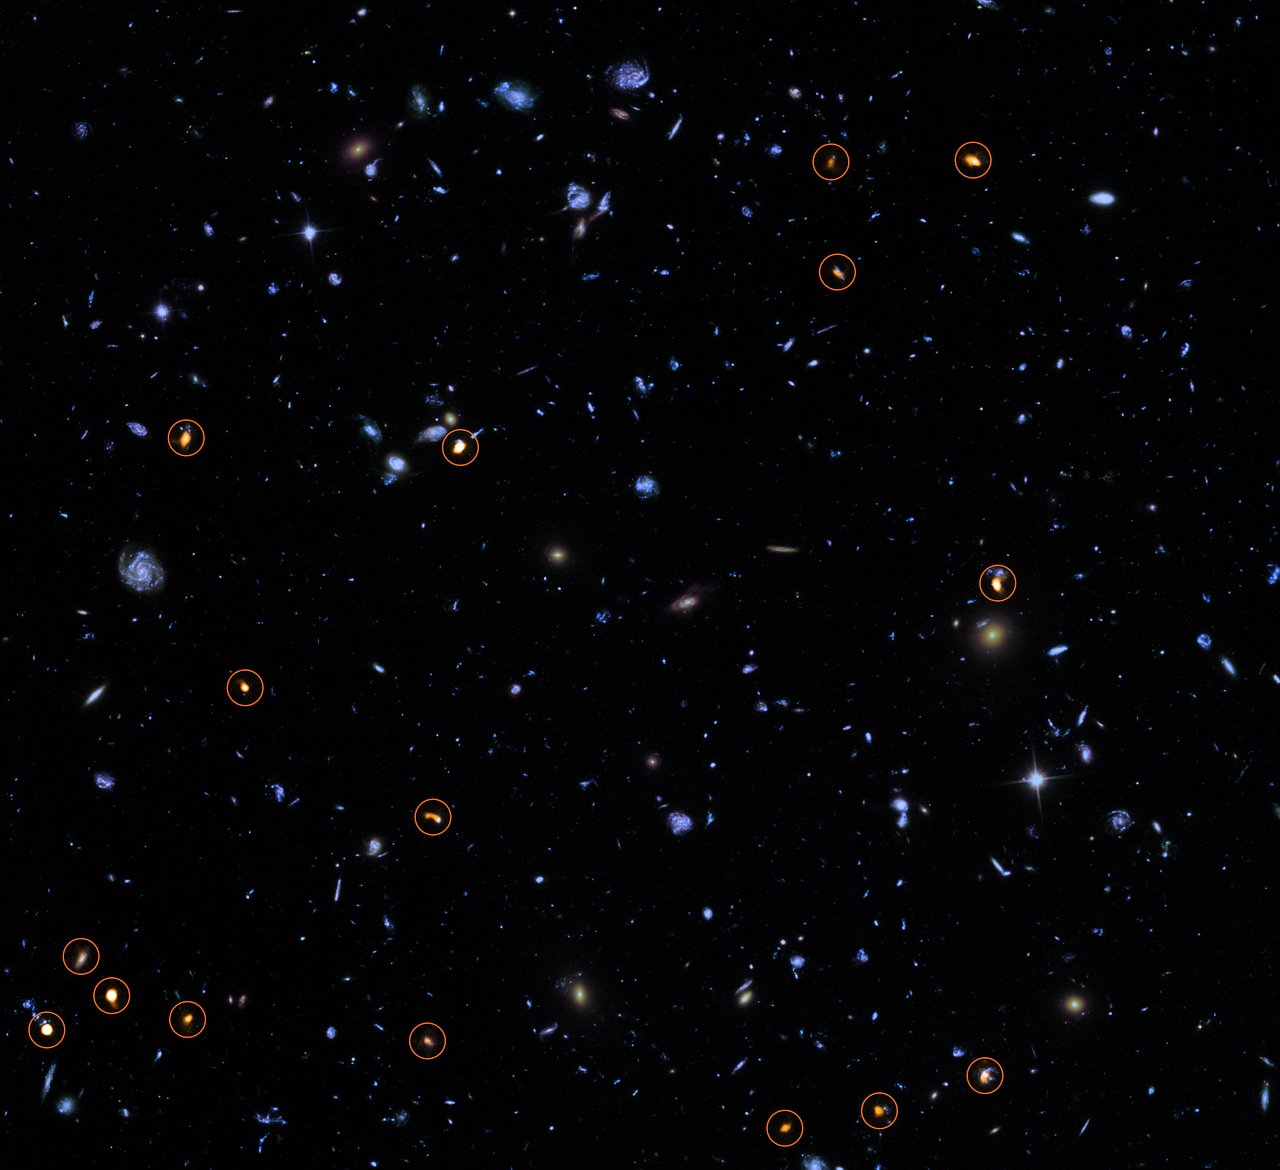 This image combines a background picture taken by the NASA/ESA Hubble Space Telescope (blue/green) with a new very deep ALMA view of this field (orange, marked with circles). All the objects that ALMA sees appear to be massive star-forming galaxies. This image is based on the ALMA survey by J. Dunlop and colleagues, covering the full HUDF area.